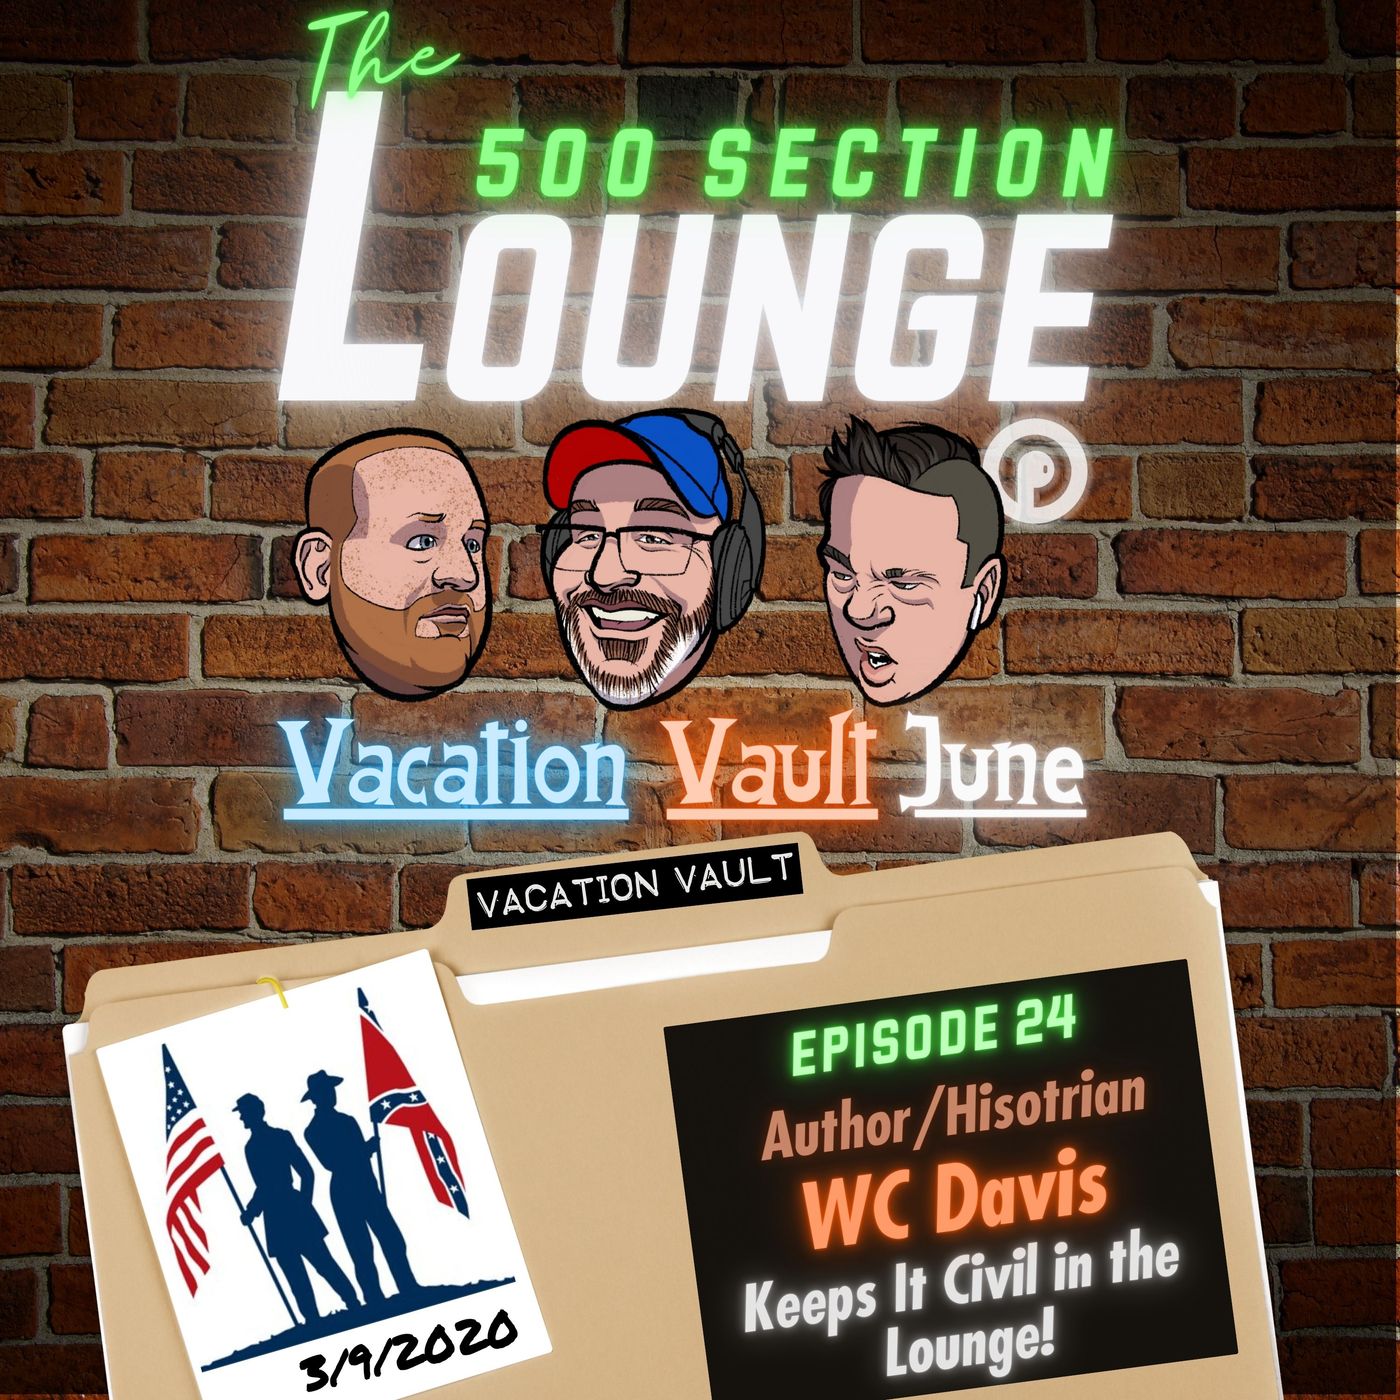 E135: Vacation Vault June- WC Davis Keeps It Civil In the Lounge!